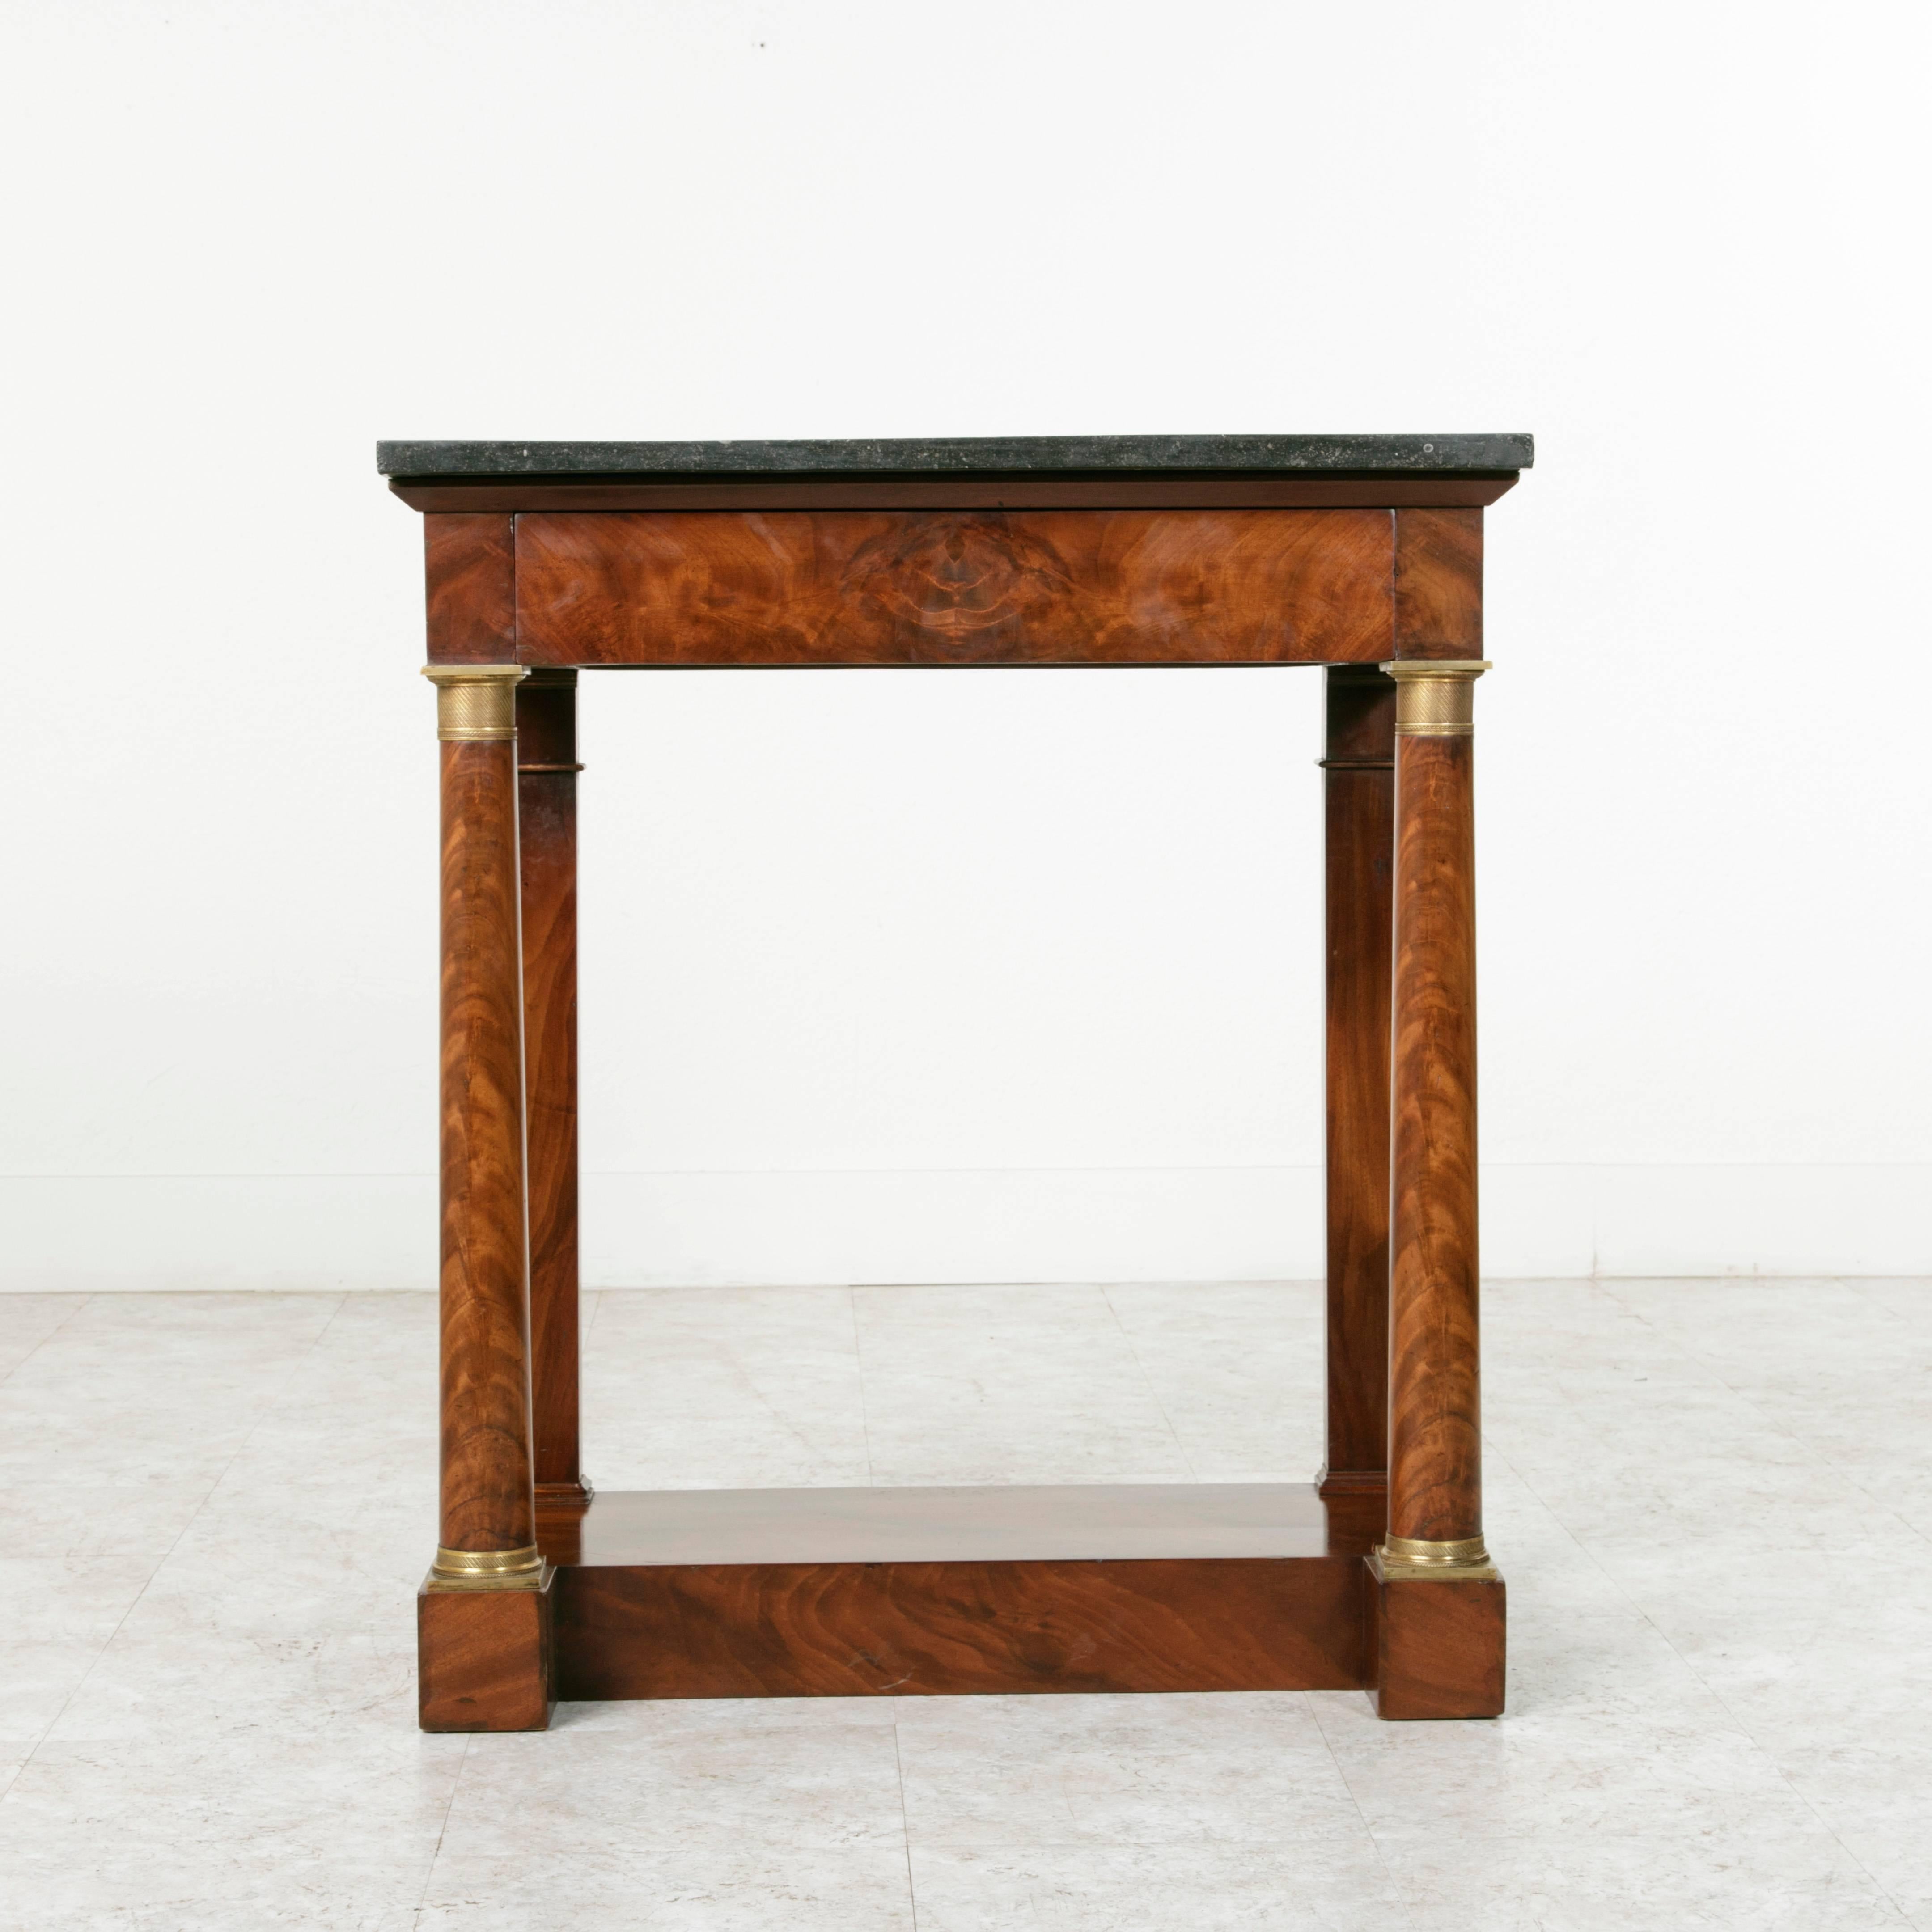 Period Empire Flamed Mahogany Console Table with Columns and Black Marble 1